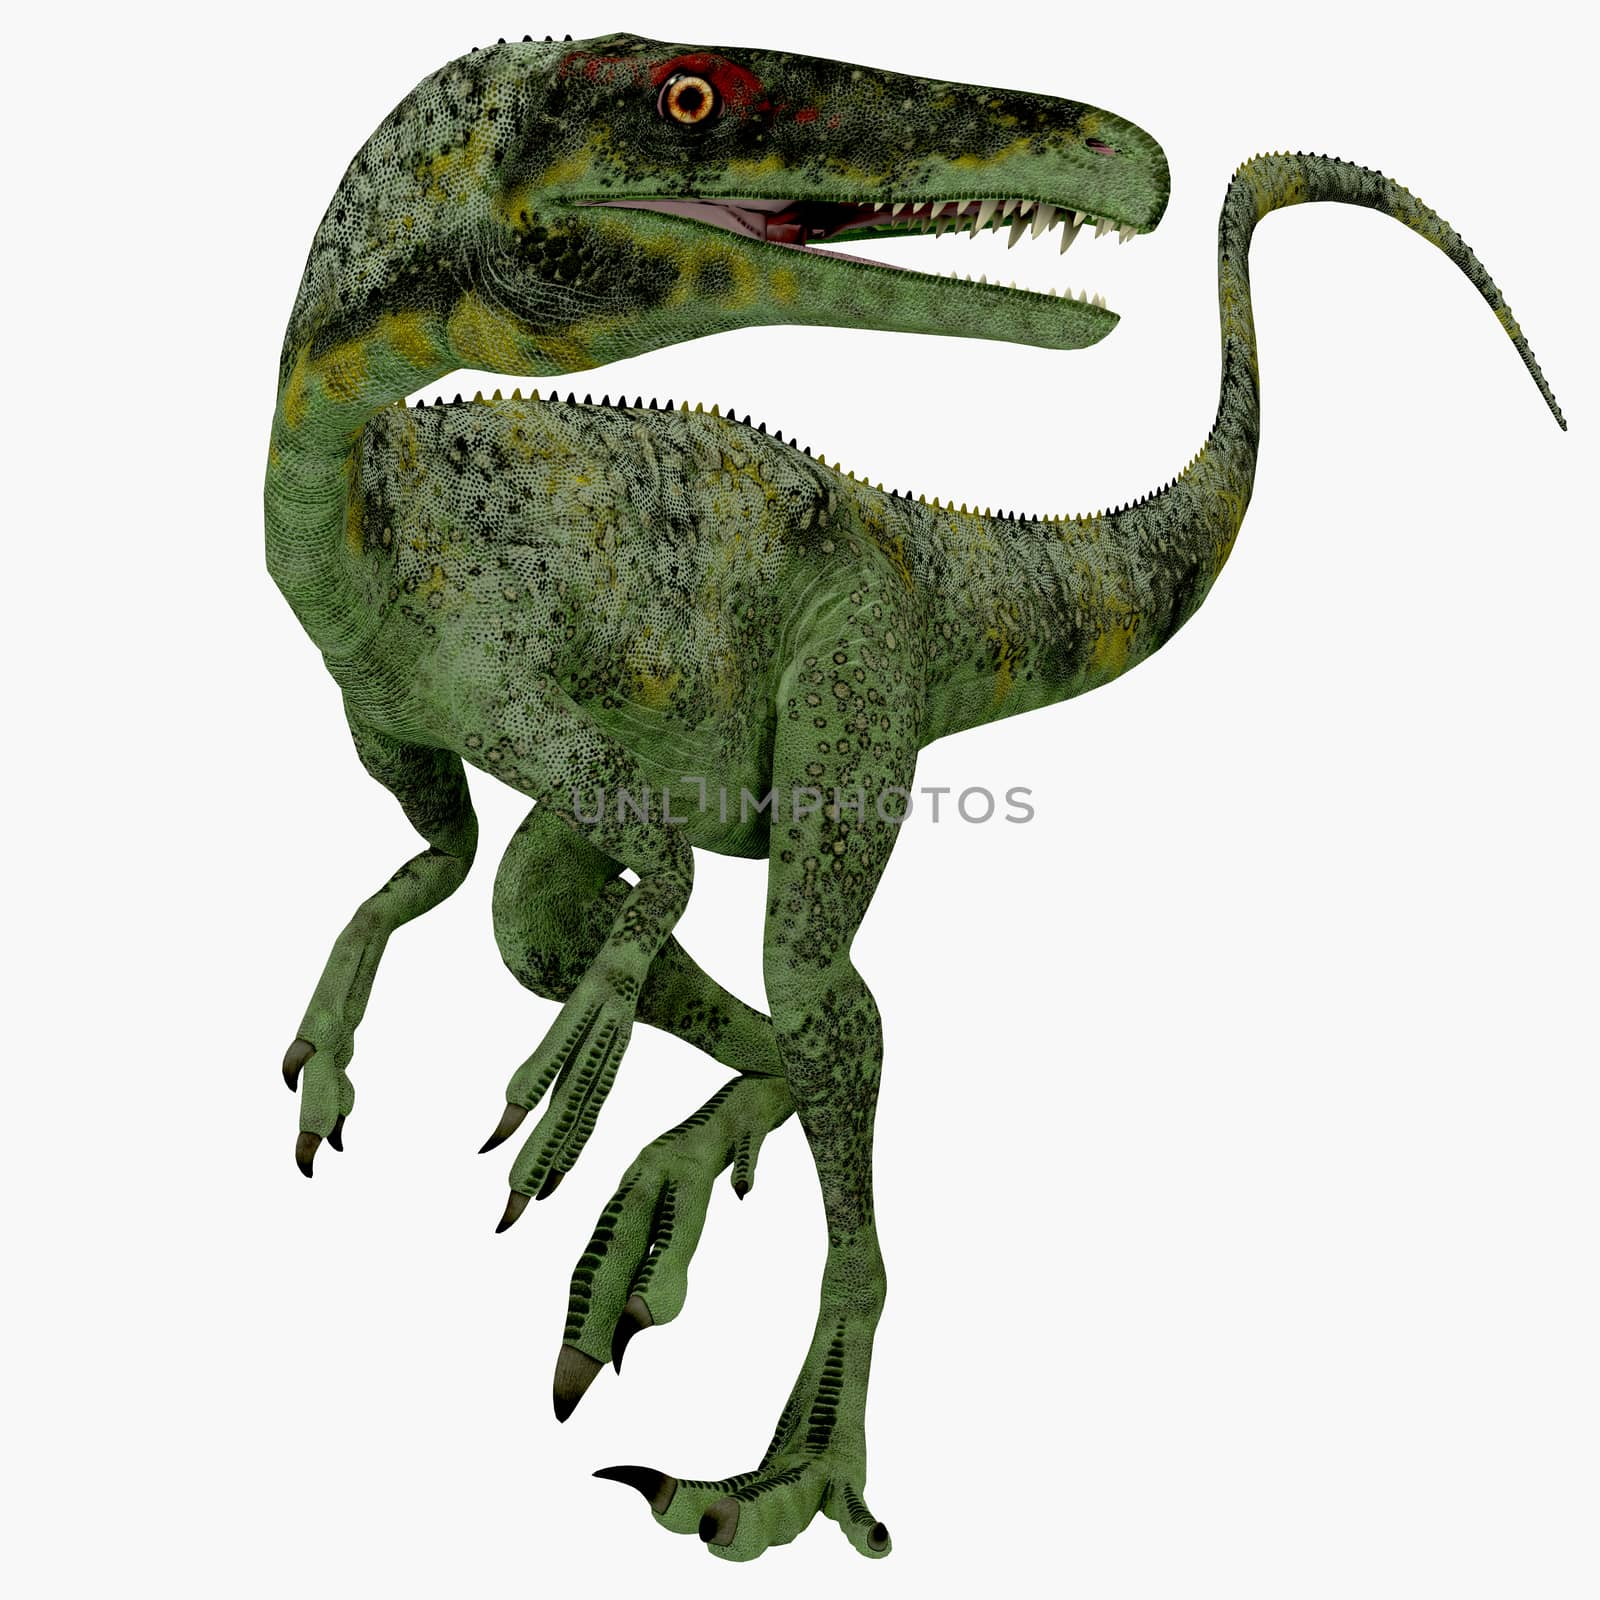 Juravenator was a small carnivorous dinosaur that lived in Germany during the Jurassic Period.